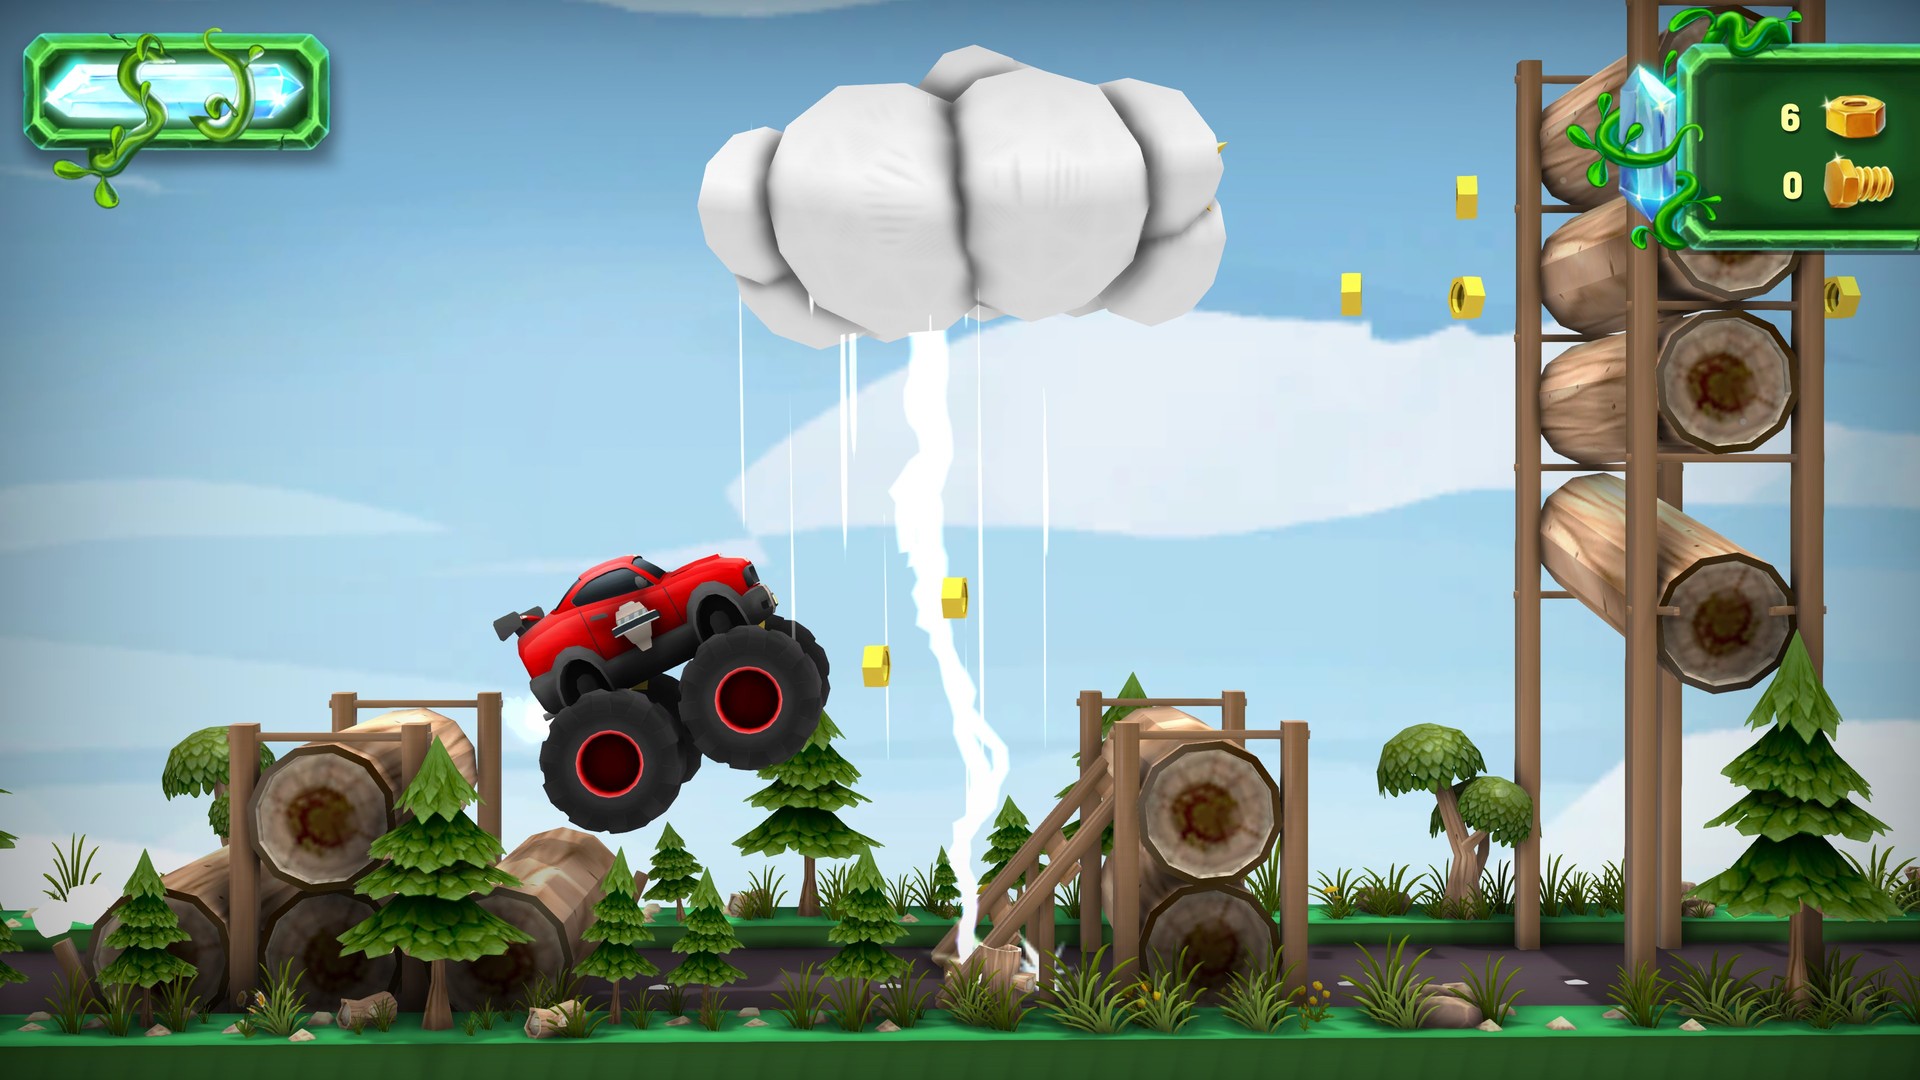 Rolling Adventure Free Download